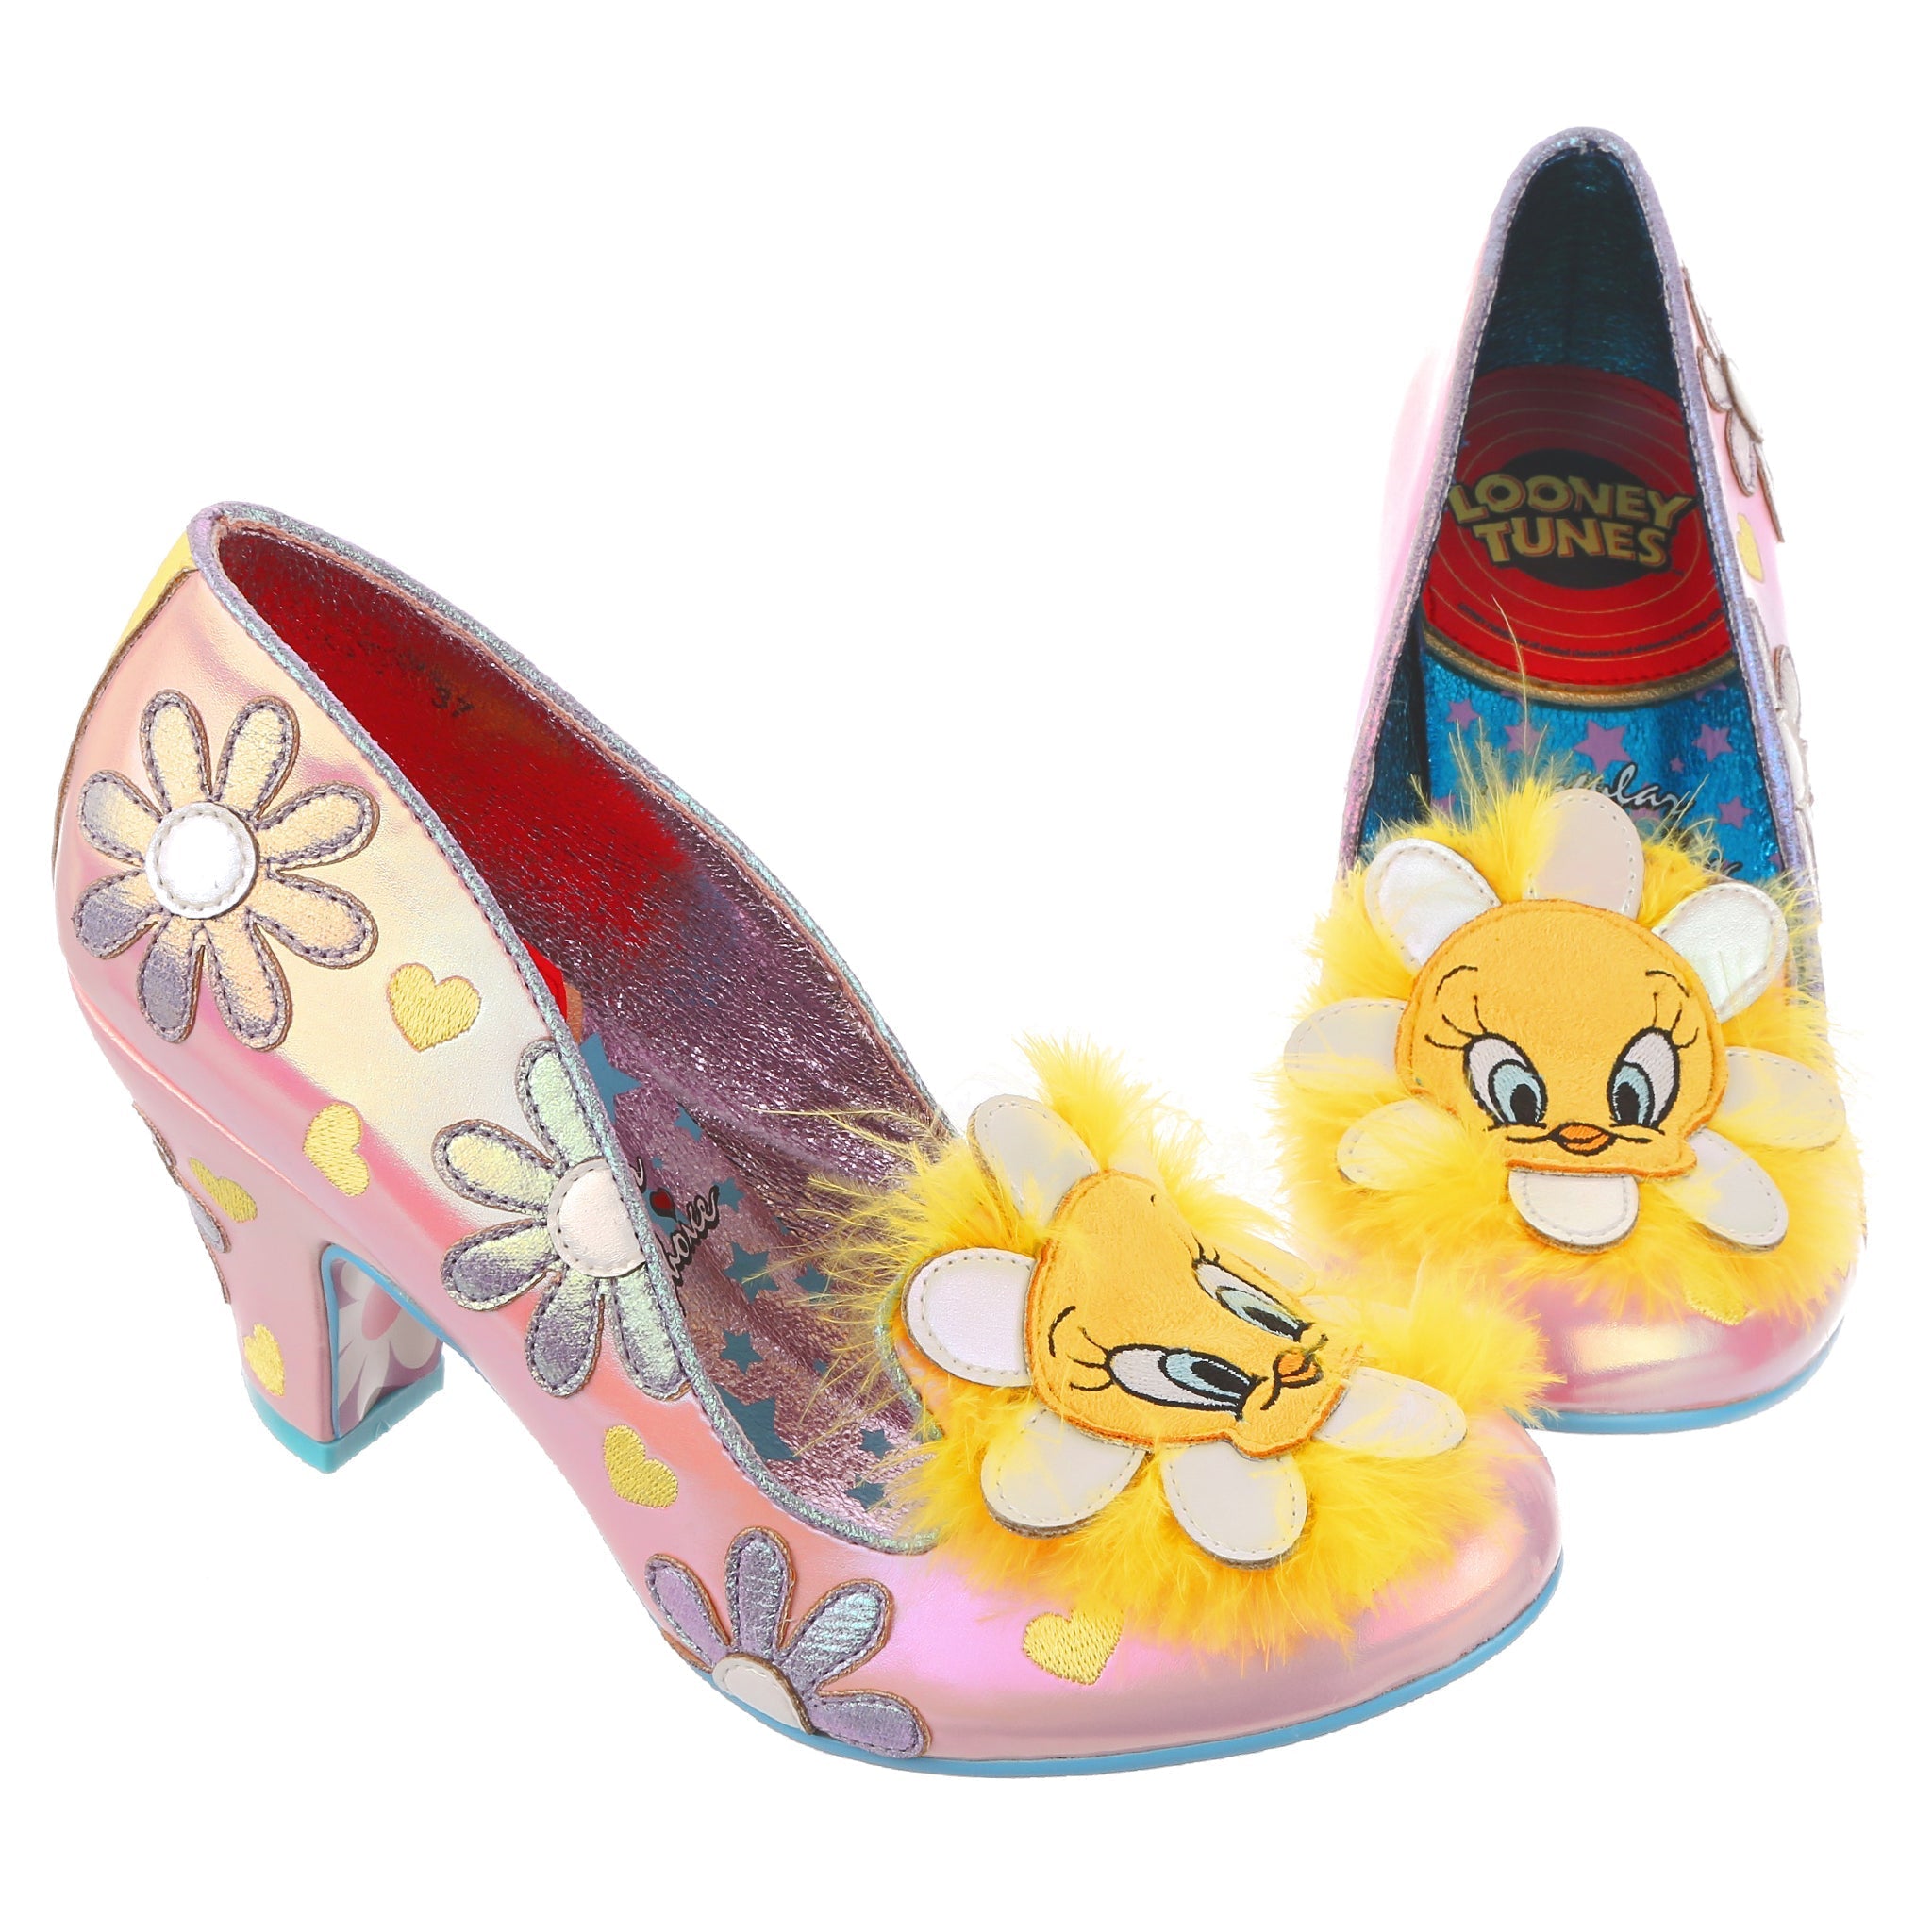 Pink iridescent mid heel shoes with purple shiny flowers and yellow embroidered hearts make a statement with a large flower with Tweety Bird's face in the centre and yellow feathers behind.